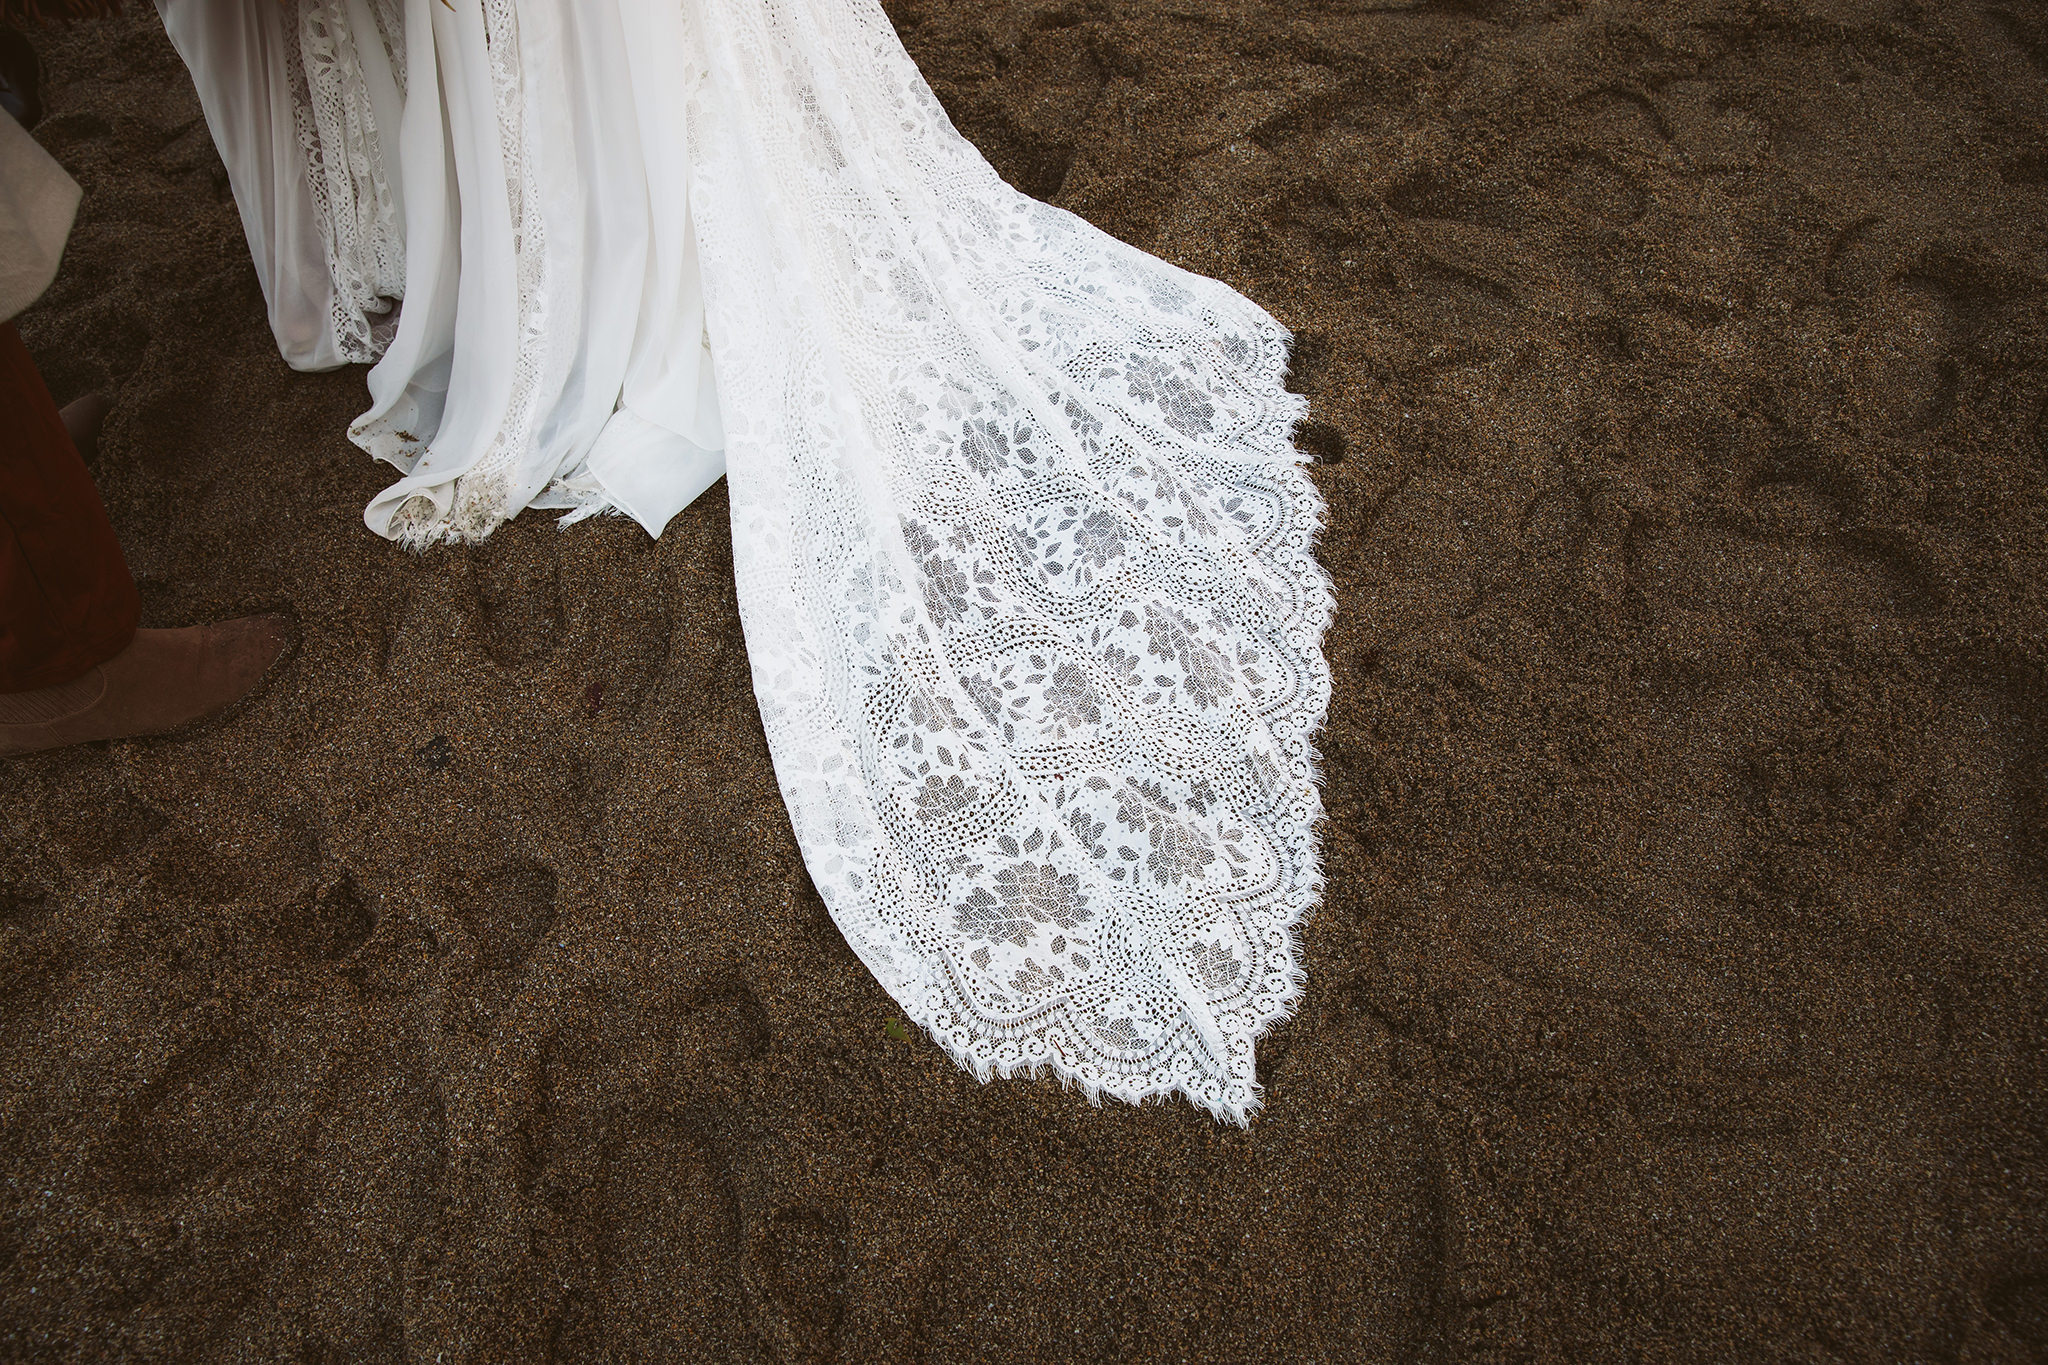 A wet wedding dress in the sand at an Oregon elopement on the beach